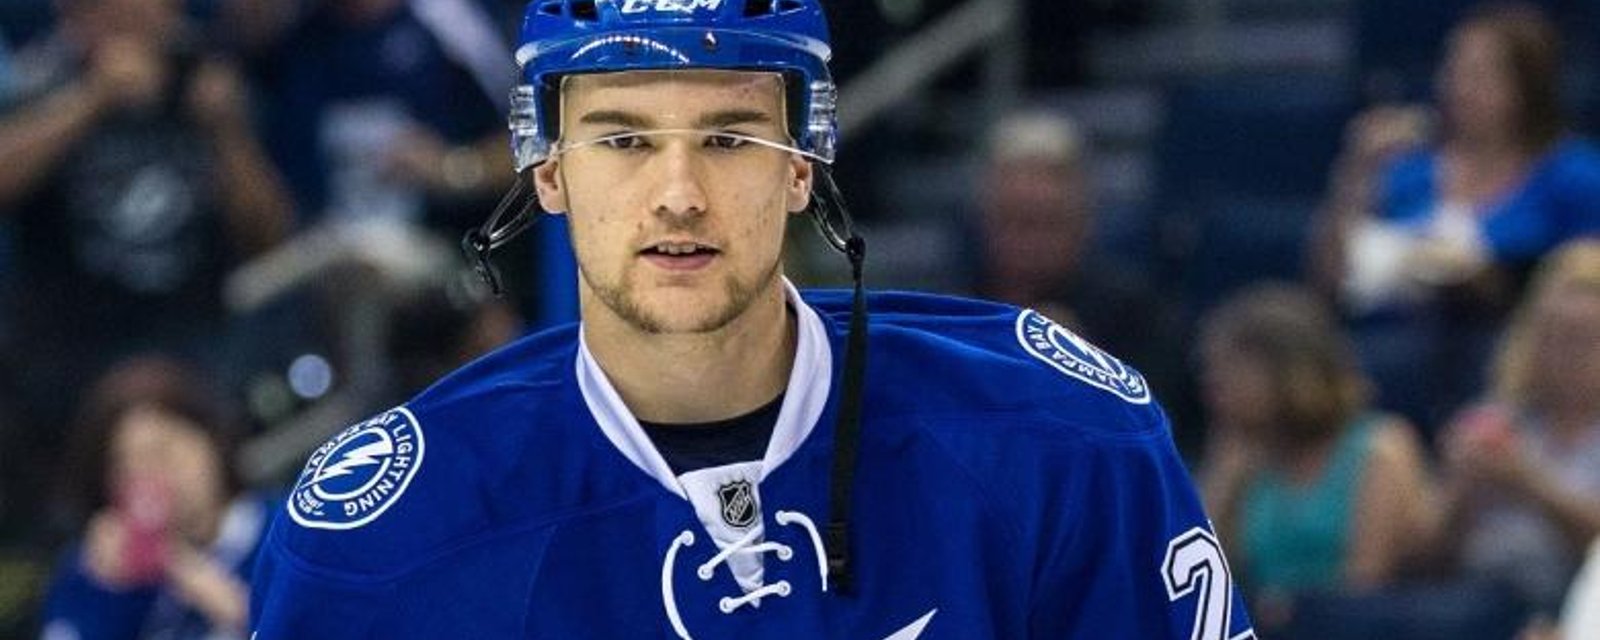 Breaking: Jonathan Drouin's trade value may have just taken a big hit.